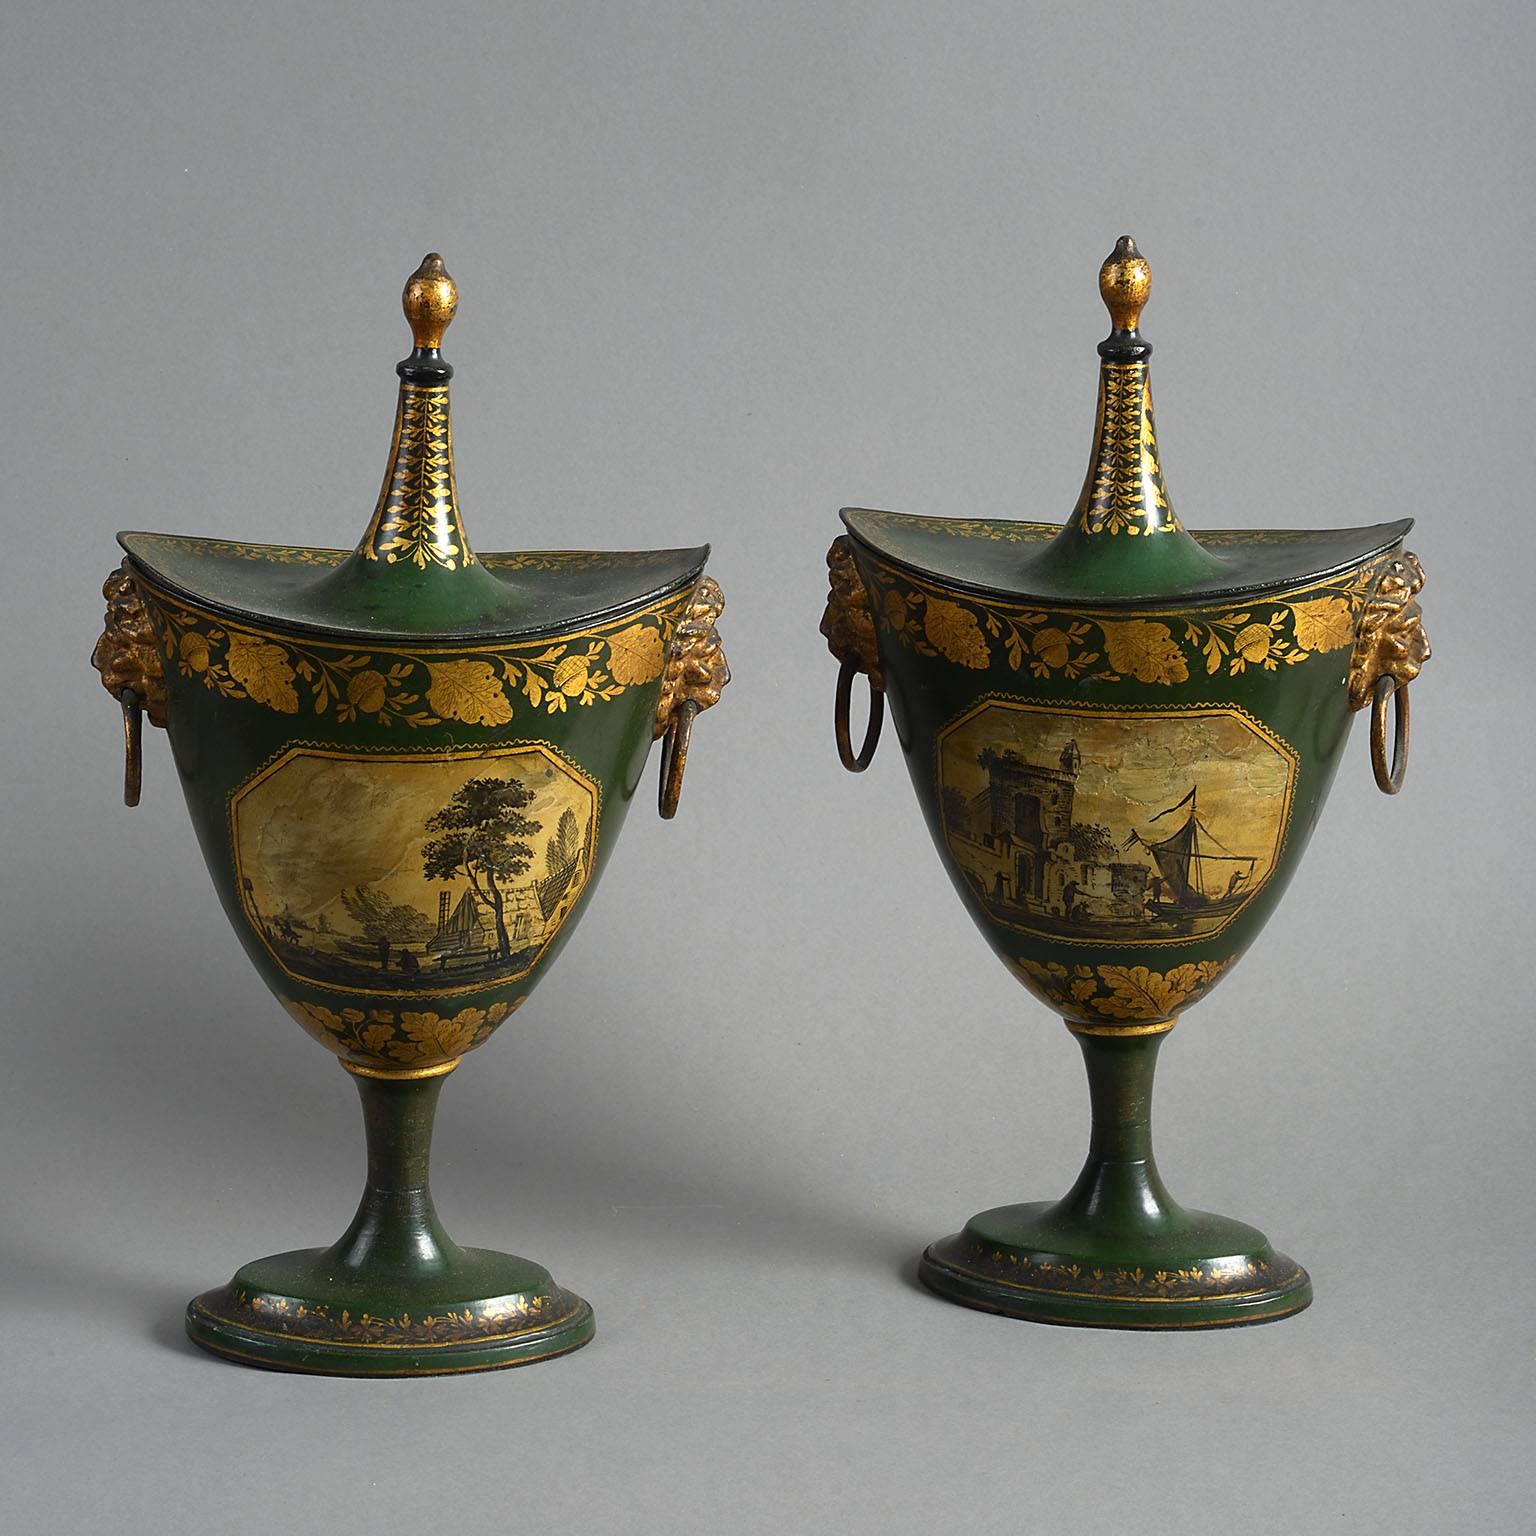 The navicular form urns below removable tented covers and raised on waisted pedestals and with lions mask handles. Finely decorated with gilt oak leaves and acorns on a dark green ground and with opposing panels on each side painted with a cottage